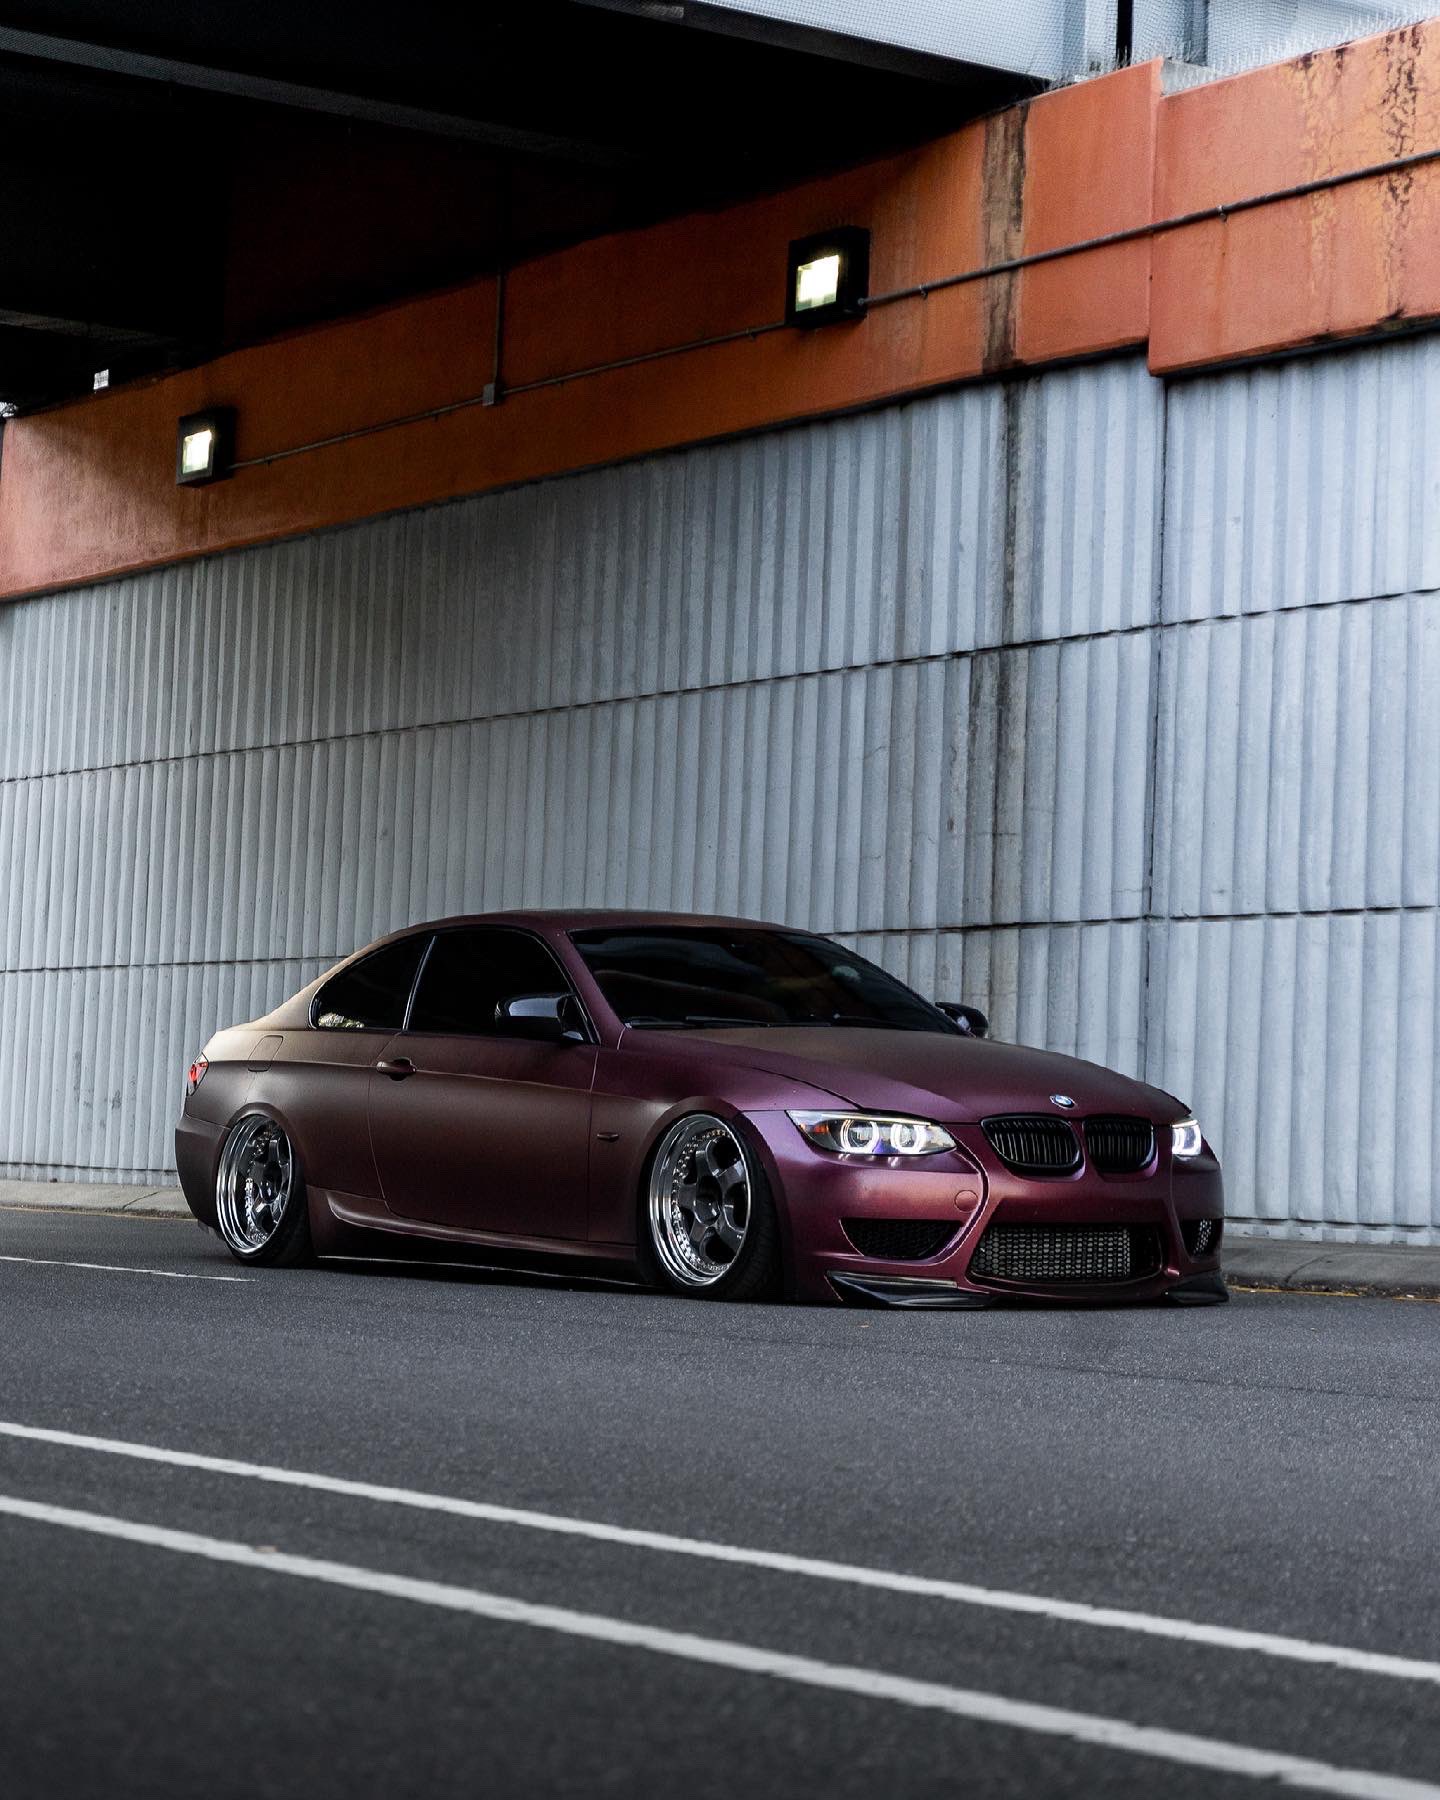 Euey on Twitter: "Bagged e92 #bmw #e92 #stance #bagged  https://t.co/RmbKFwyMRw" / Twitter